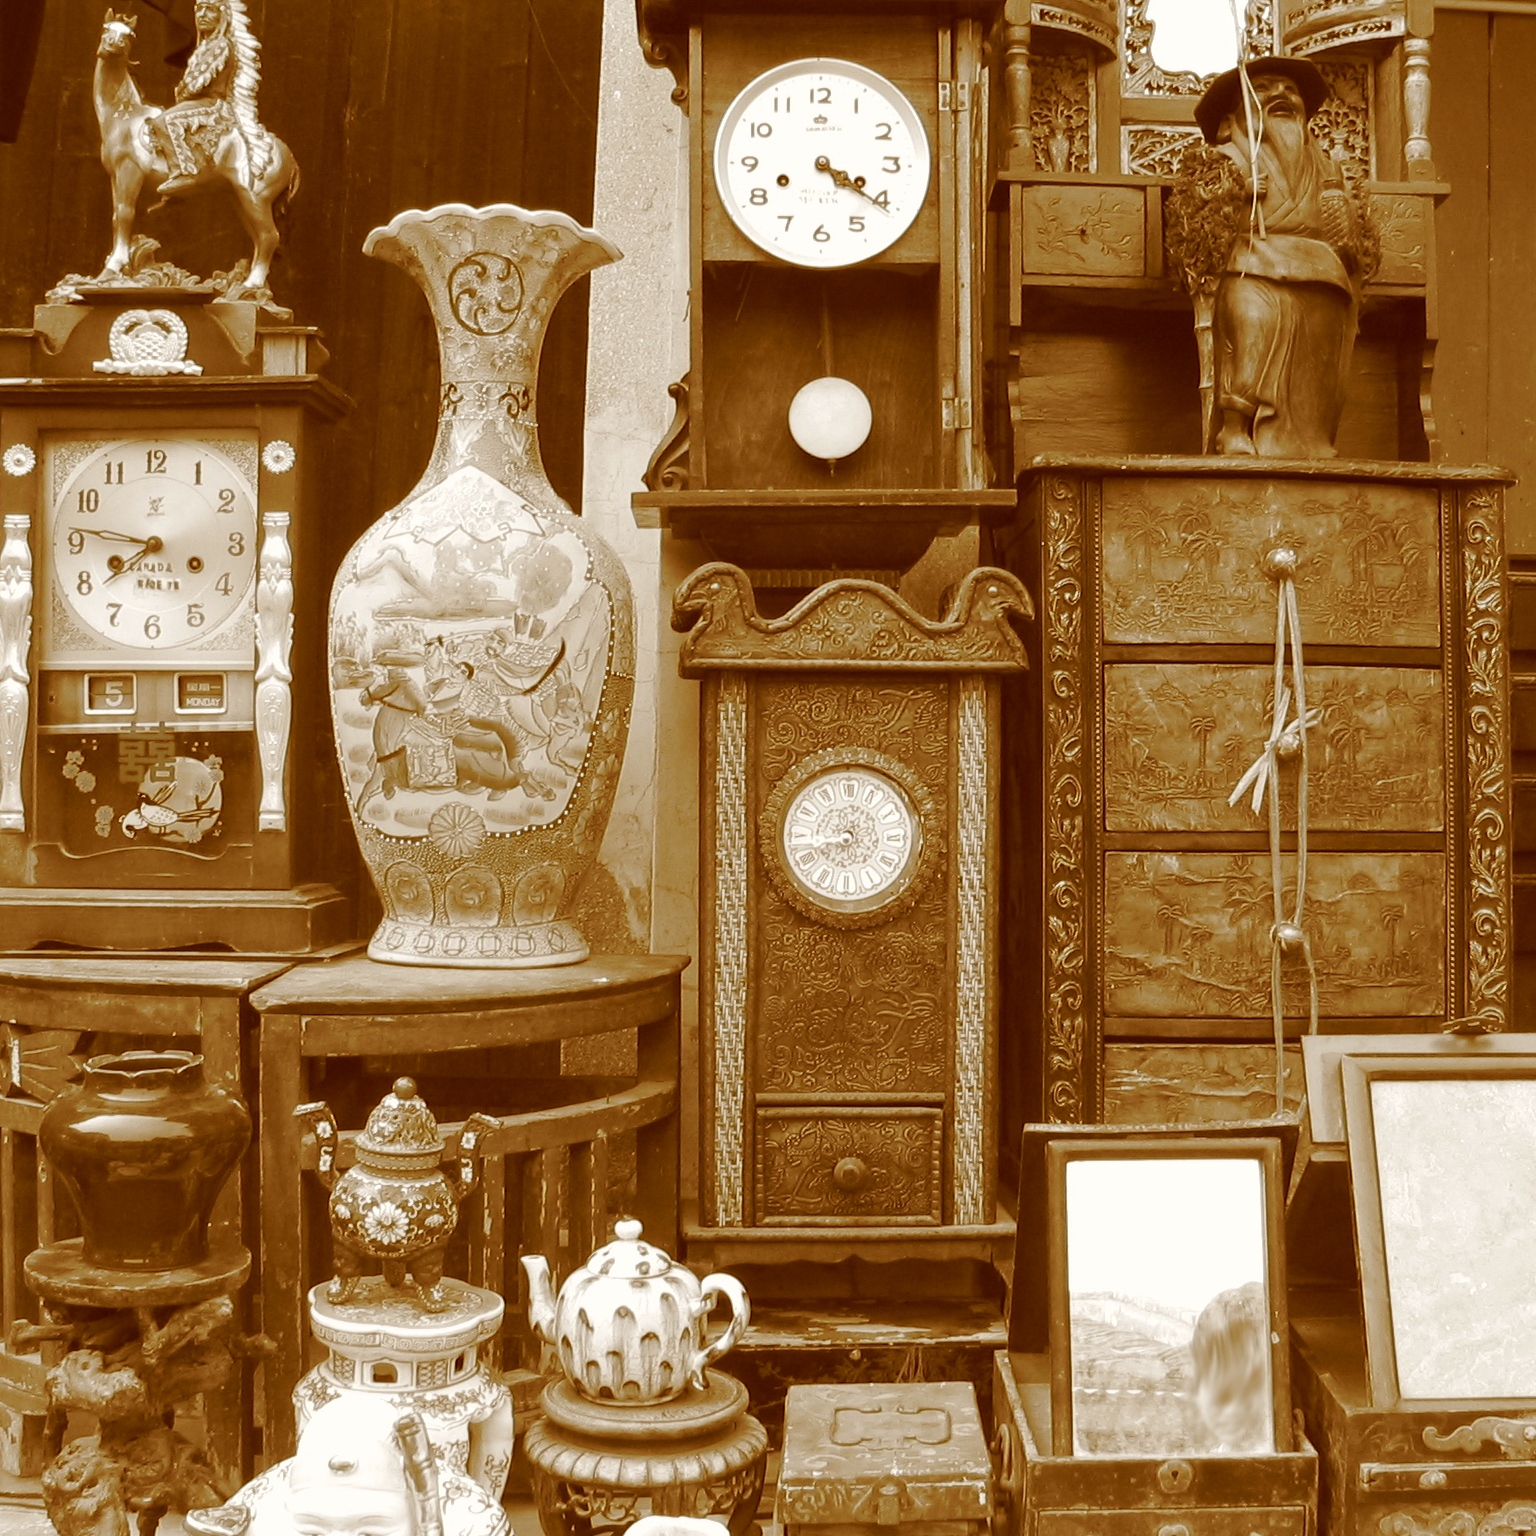 Ship Antique Furniture Stress-Free with Fine Art Shippers